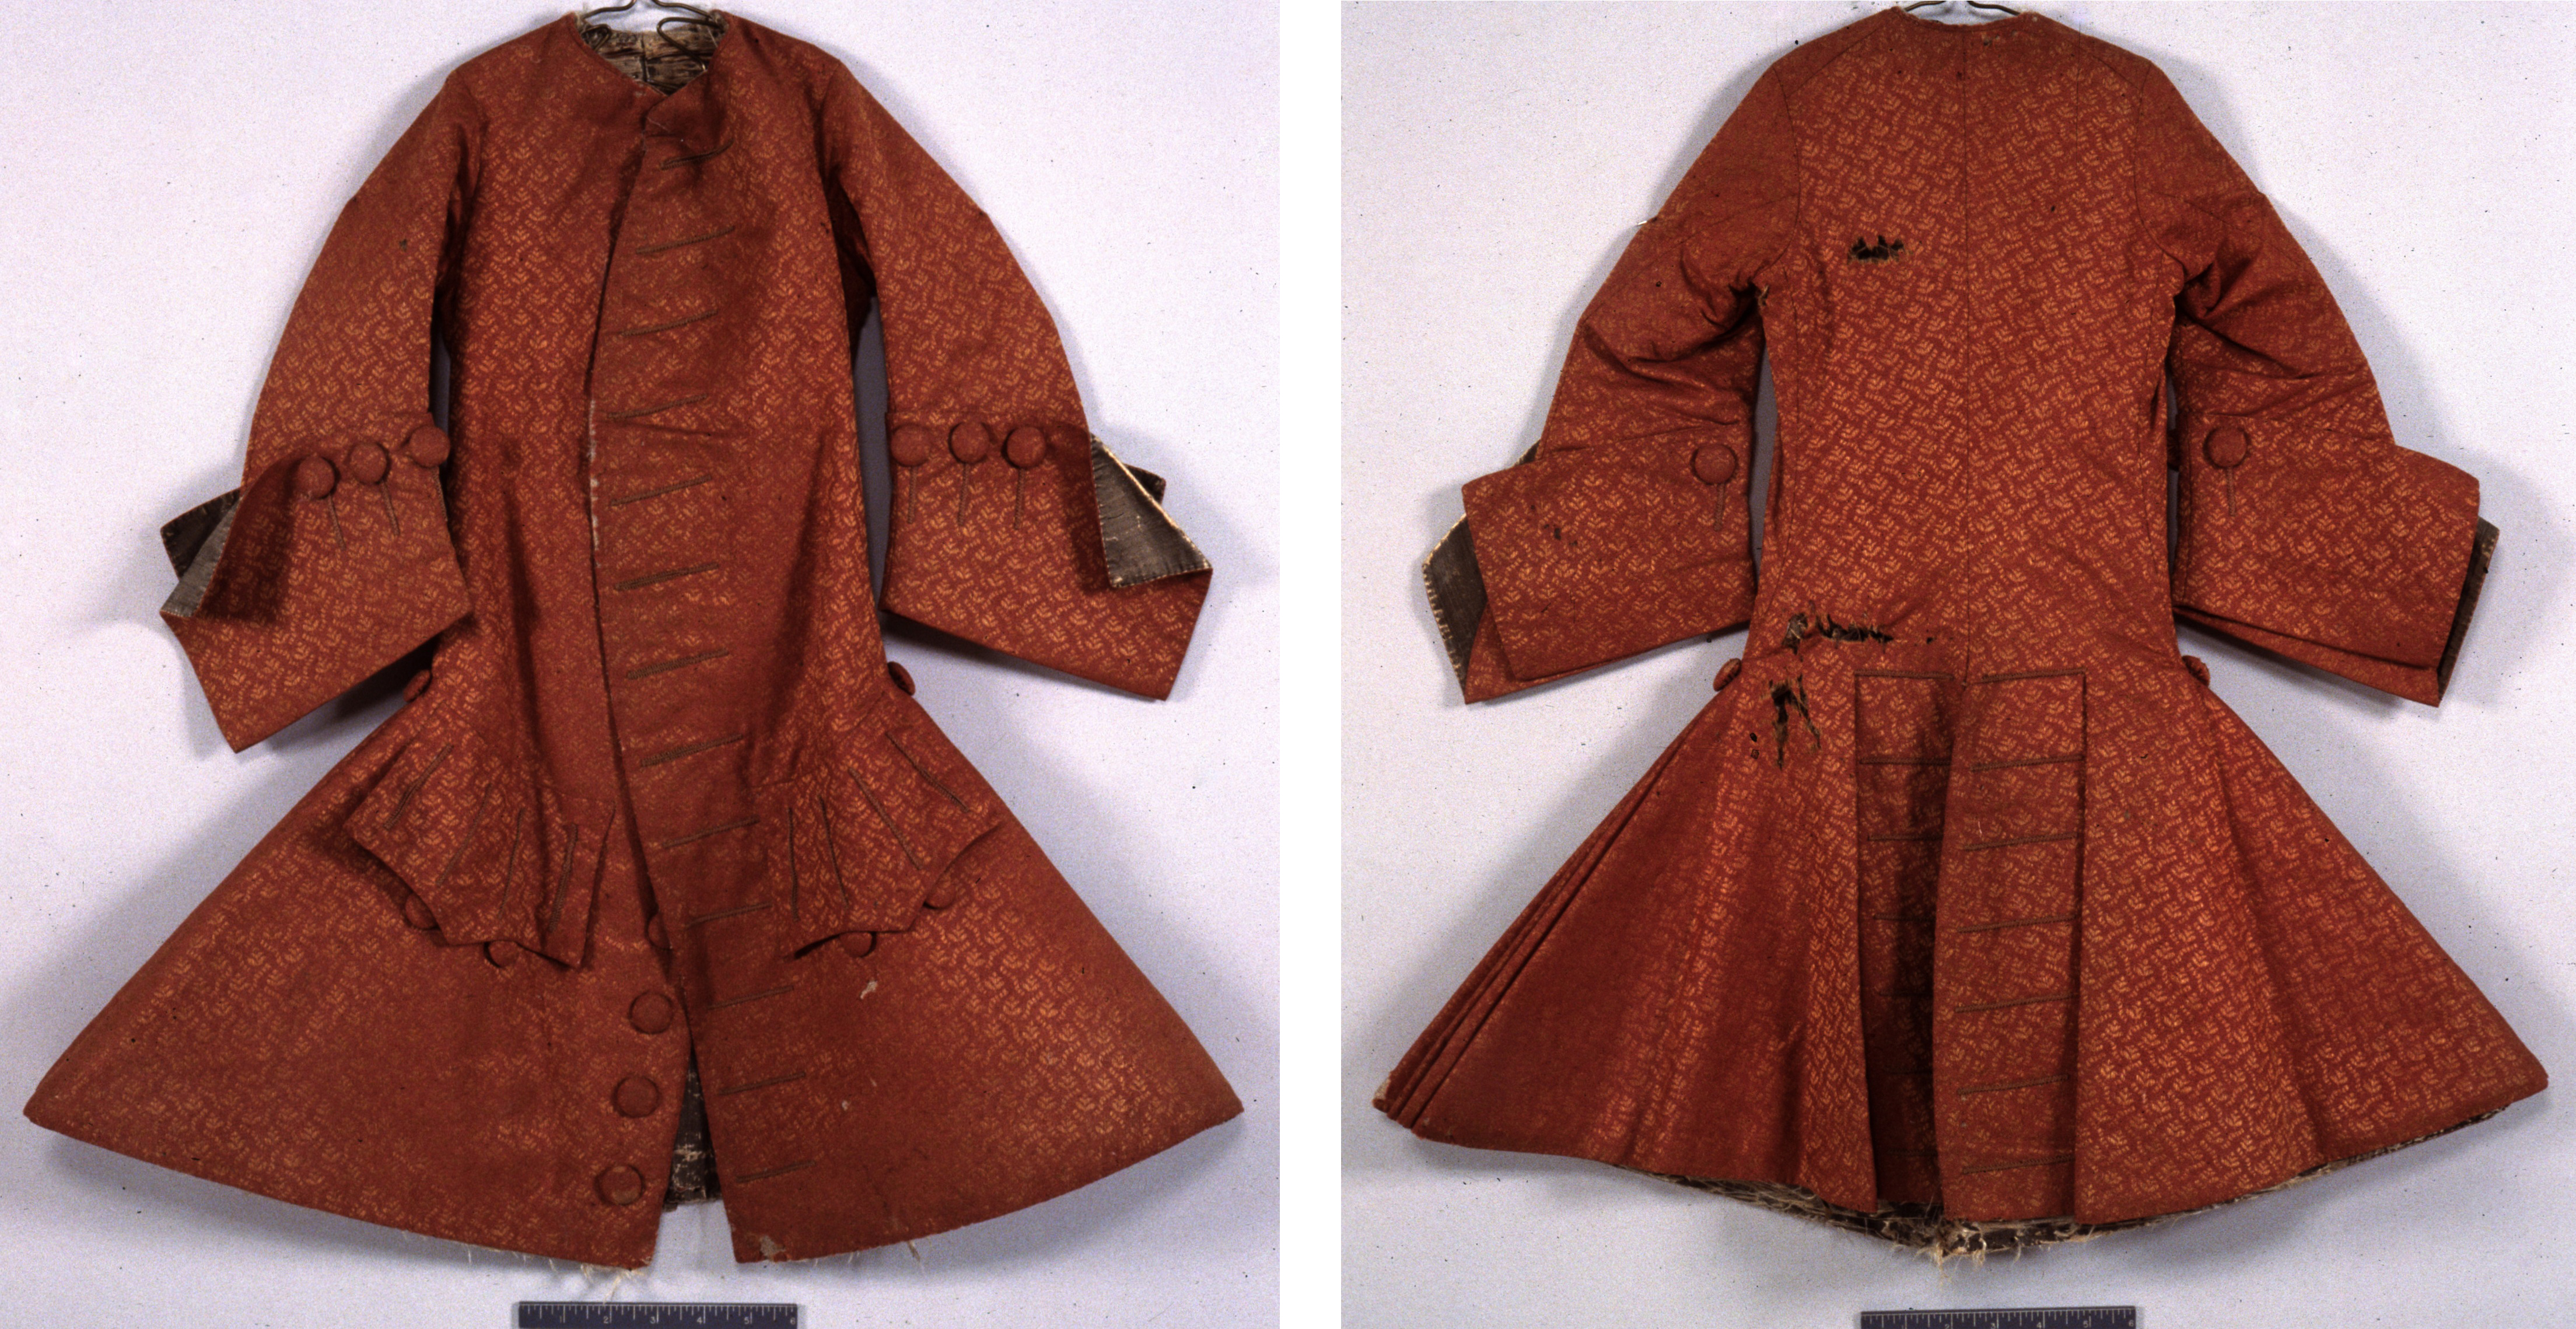 (Before conservation—Left: front; Right: back) Boy’s Coat, Italy, 1720–30, Los Angeles County Museum of Art, gift of Sanford and Mary Jane Bloom, photos by Catherine McLean